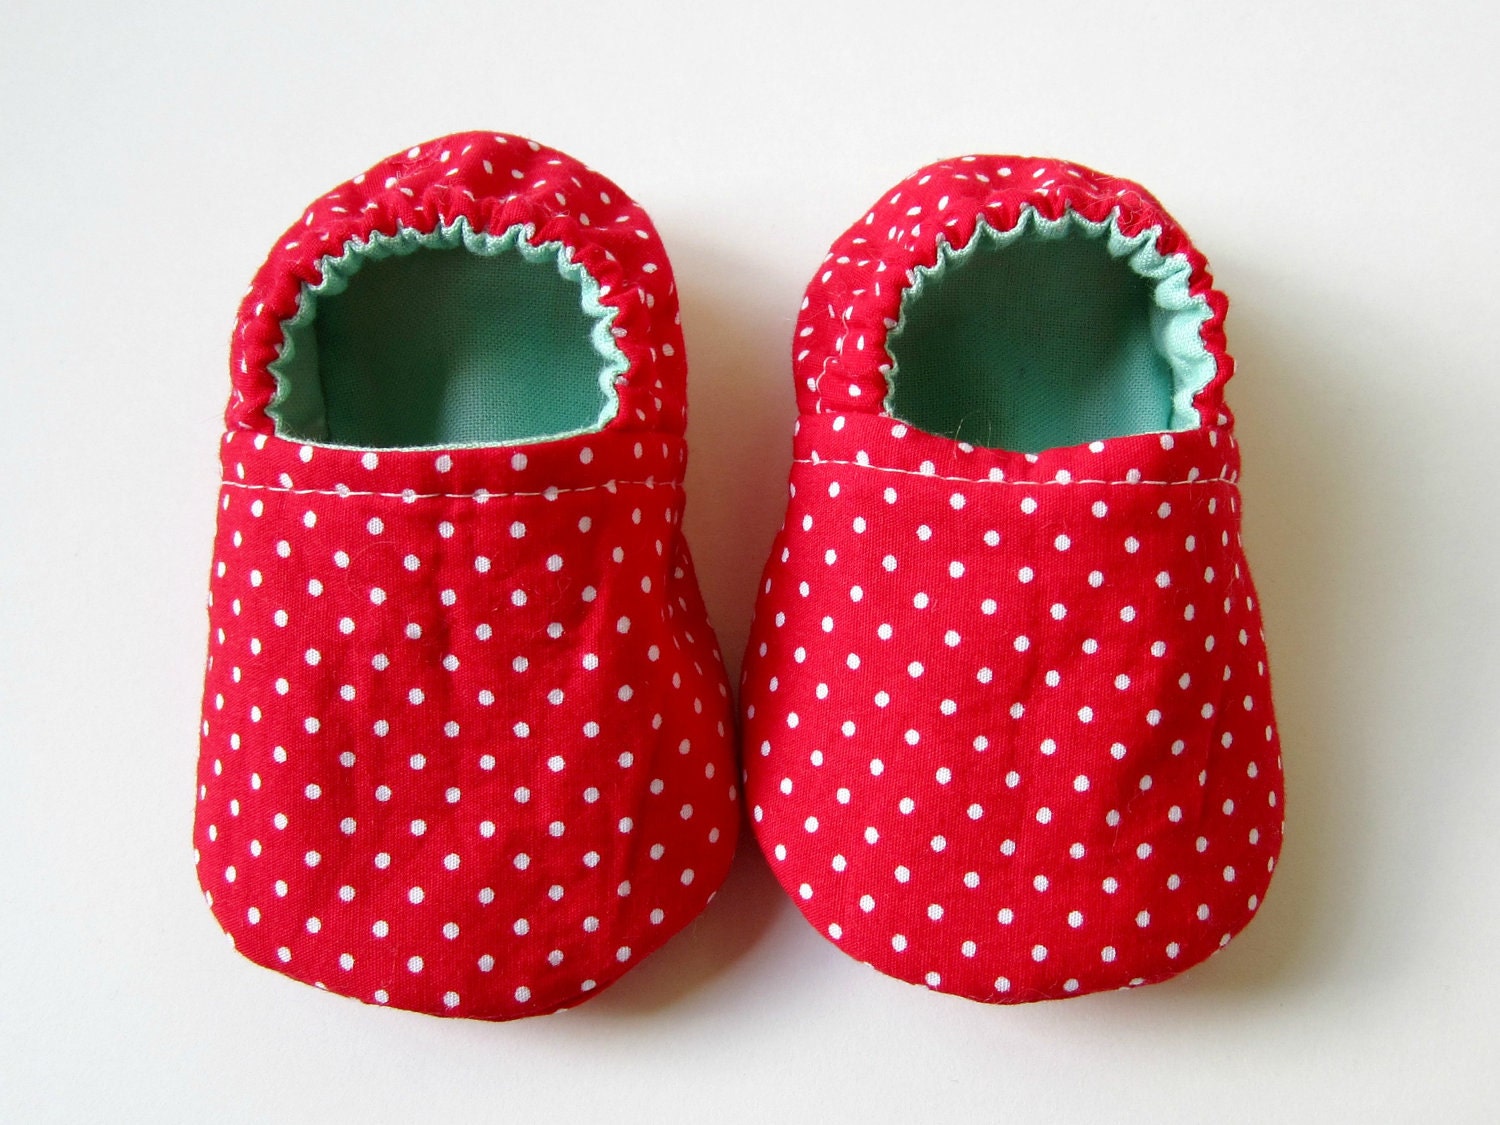 NEW - Reversible Baby Booties in Red, White, and Aqua with Polka Dots - Sizes 1-4